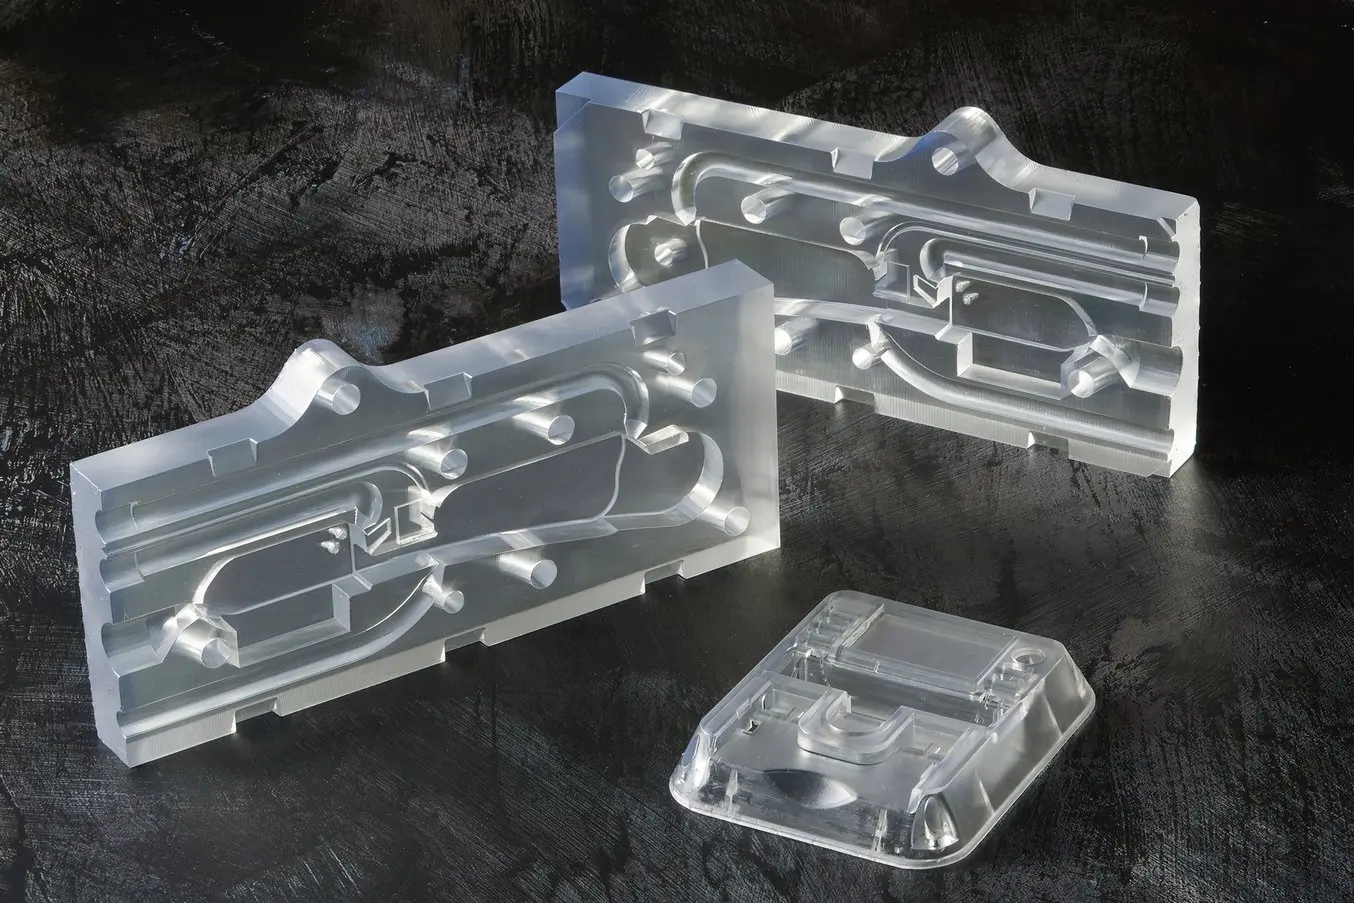 clear resin 3D printed parts